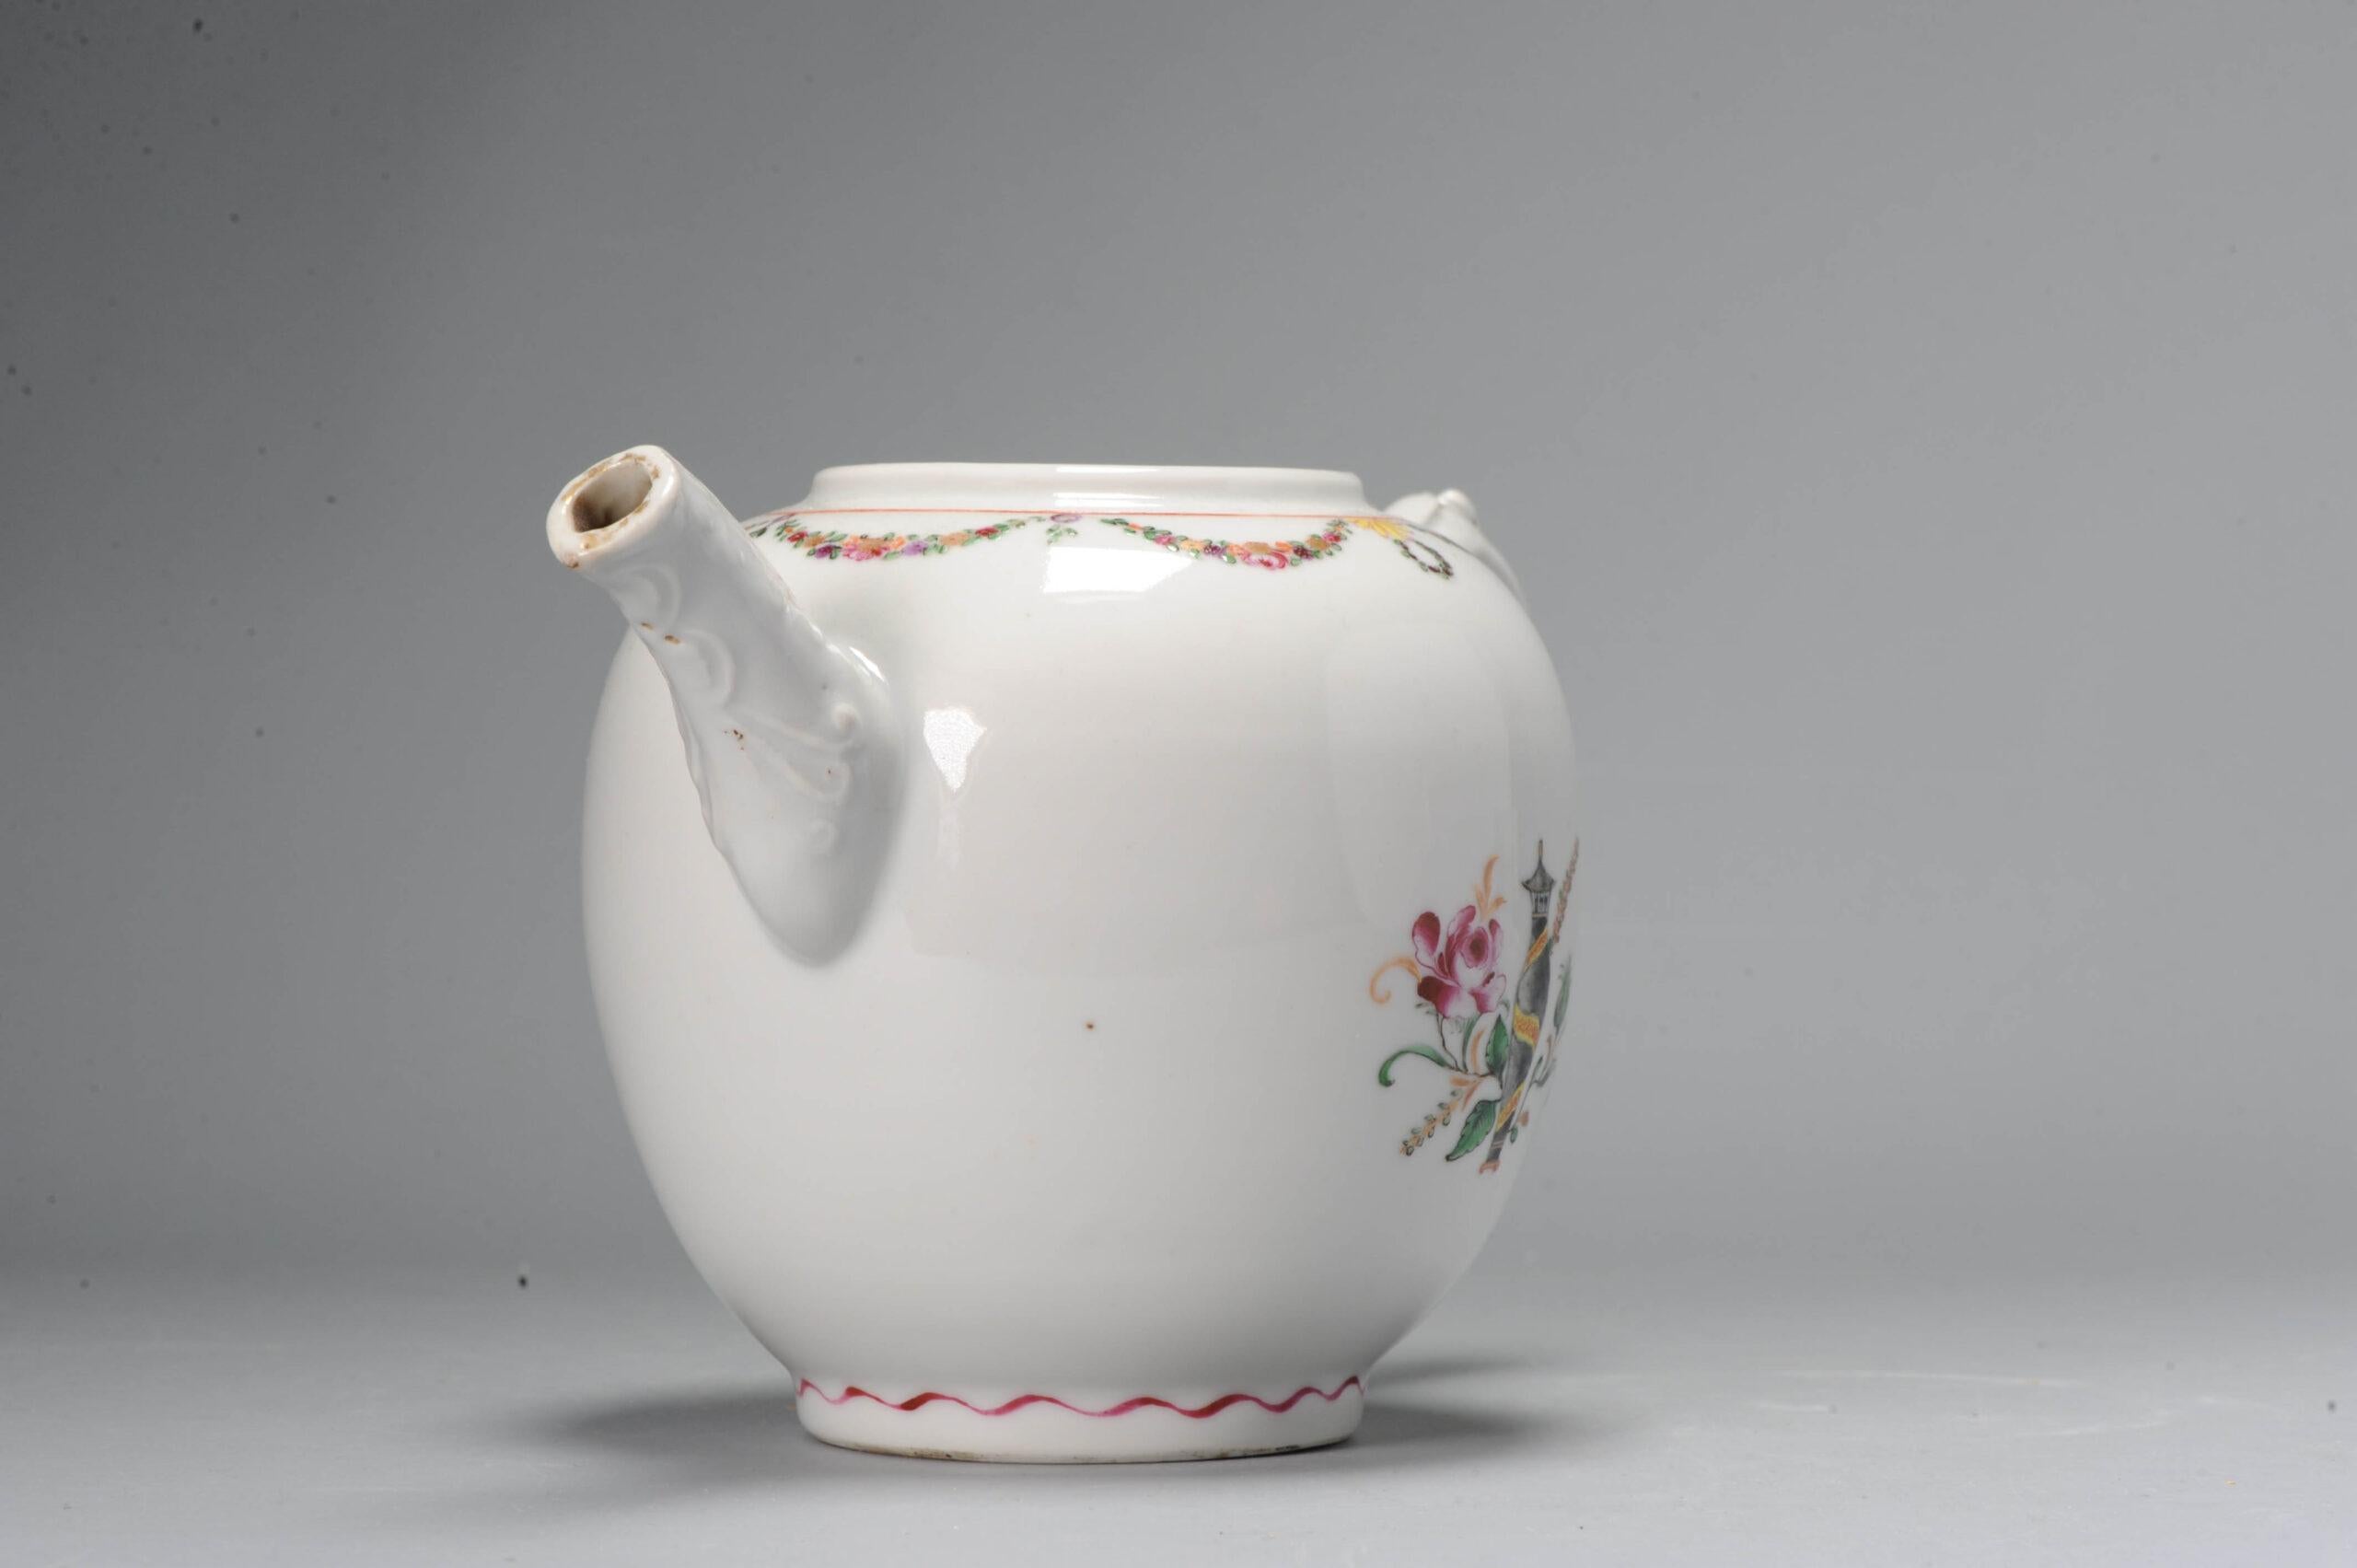 Qianlong, 18th century,Famille Rose.
Famile rose enamels with flowers. Large Teapot.
Missing lid

Additional information:
Material: Porcelain & Pottery
Type: Tea/Coffee Drinking: Bowls, Cups & Teapots
Region of Origin: China
Emperor: Qianlong